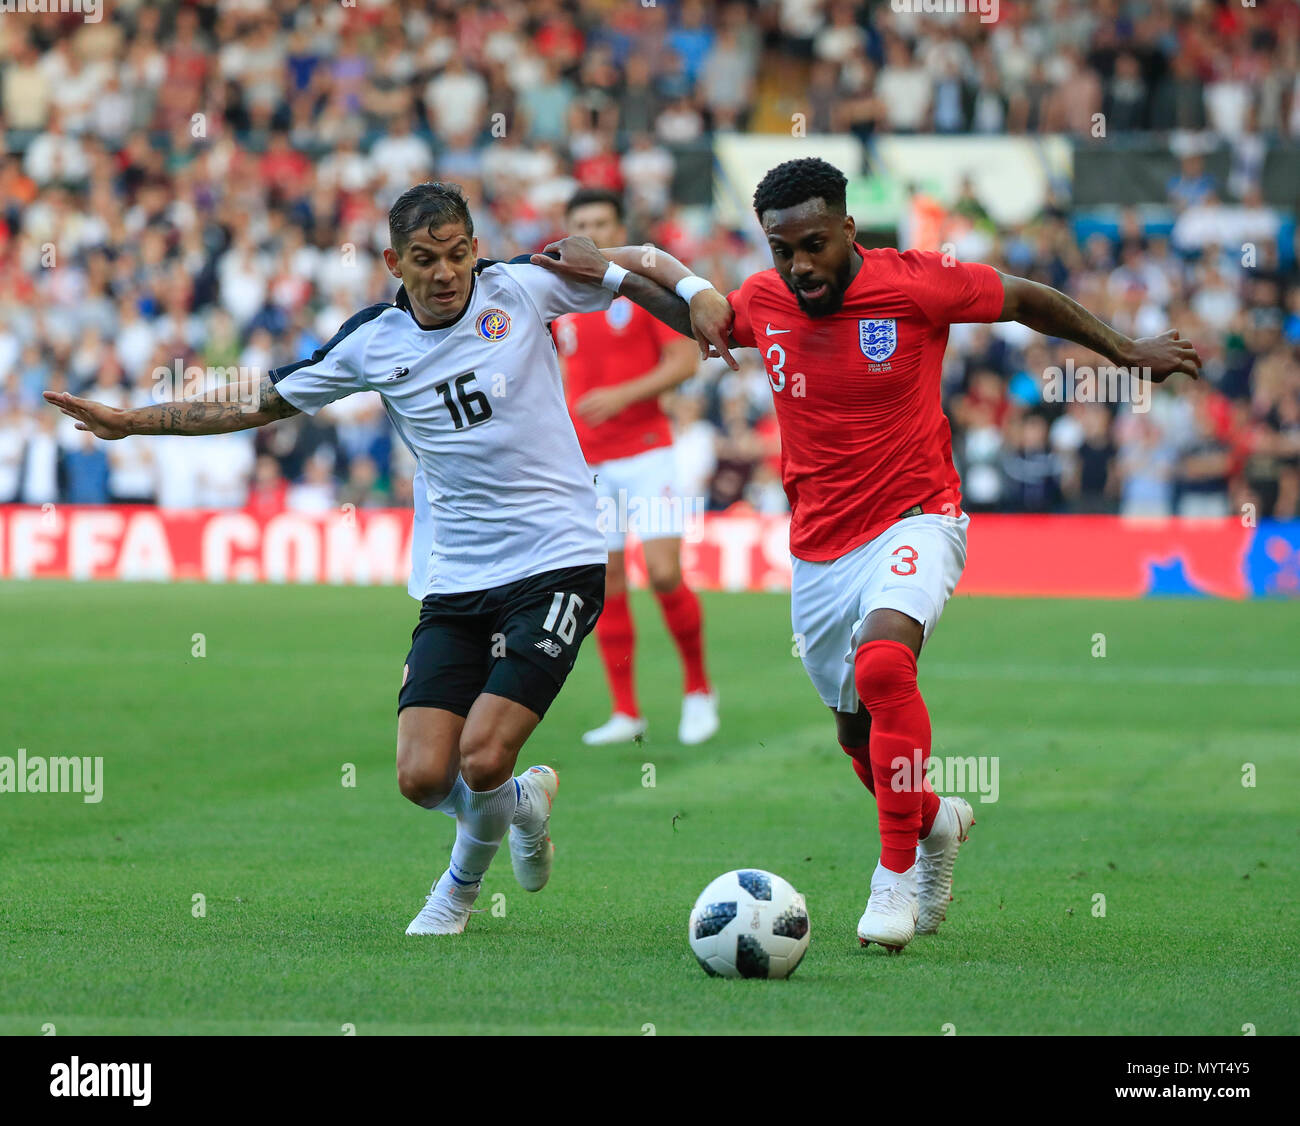 Elland Road, Leeds, UK. 7th June, 2018. International football friendly, England versus Costa Rica; Danny Rose of England makes a run down the wing challenged by Cristian Gamboa of Costa Rica Credit: Action Plus Sports/Alamy Live News Stock Photo